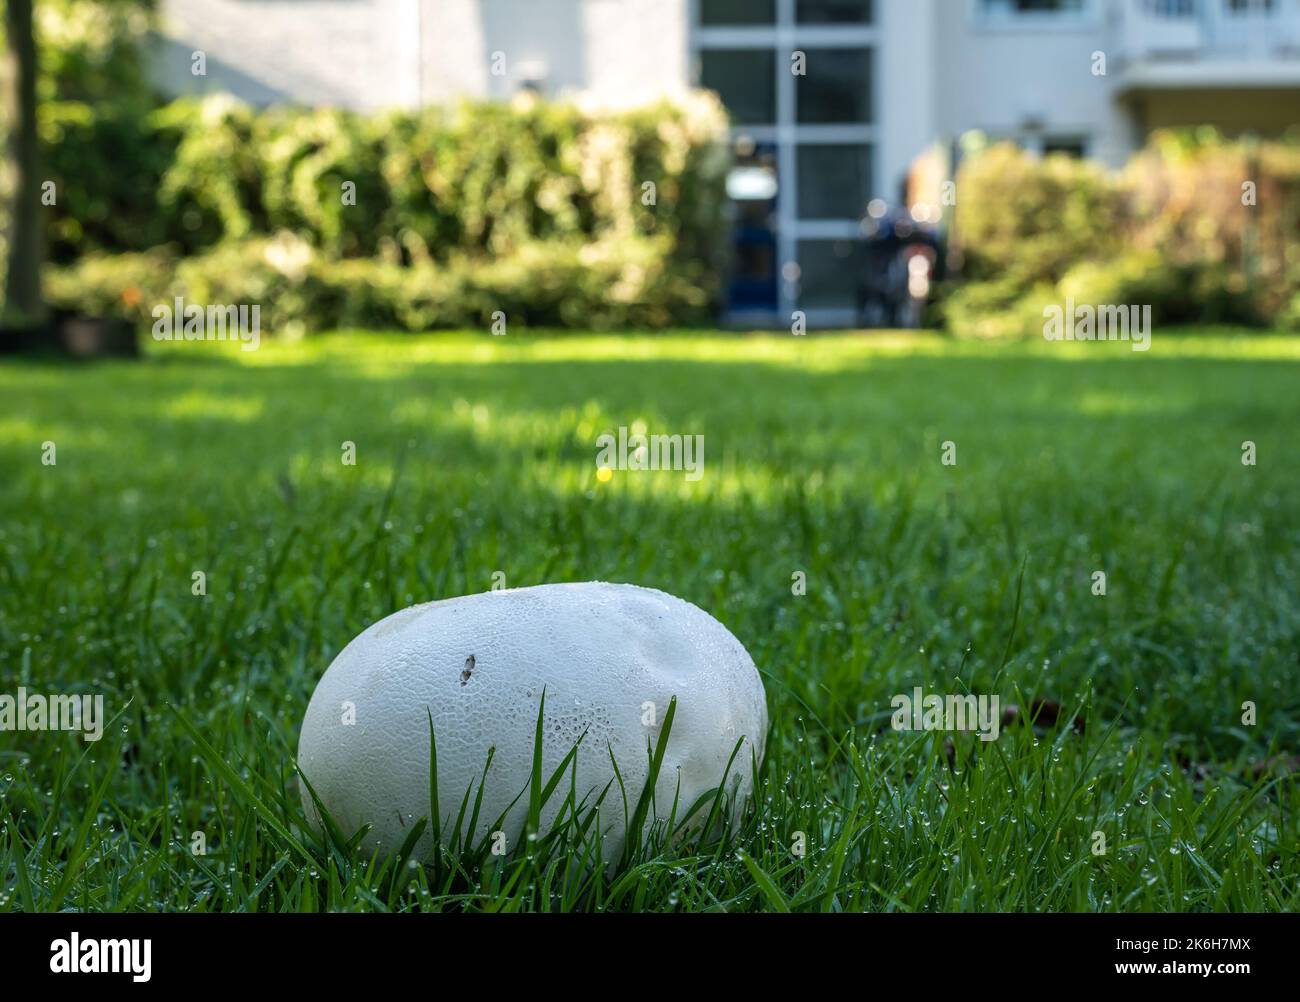 Calvatia gigantea, commonly known as the giant puffball mushroom, growing in front of the building, selective focus Stock Photo